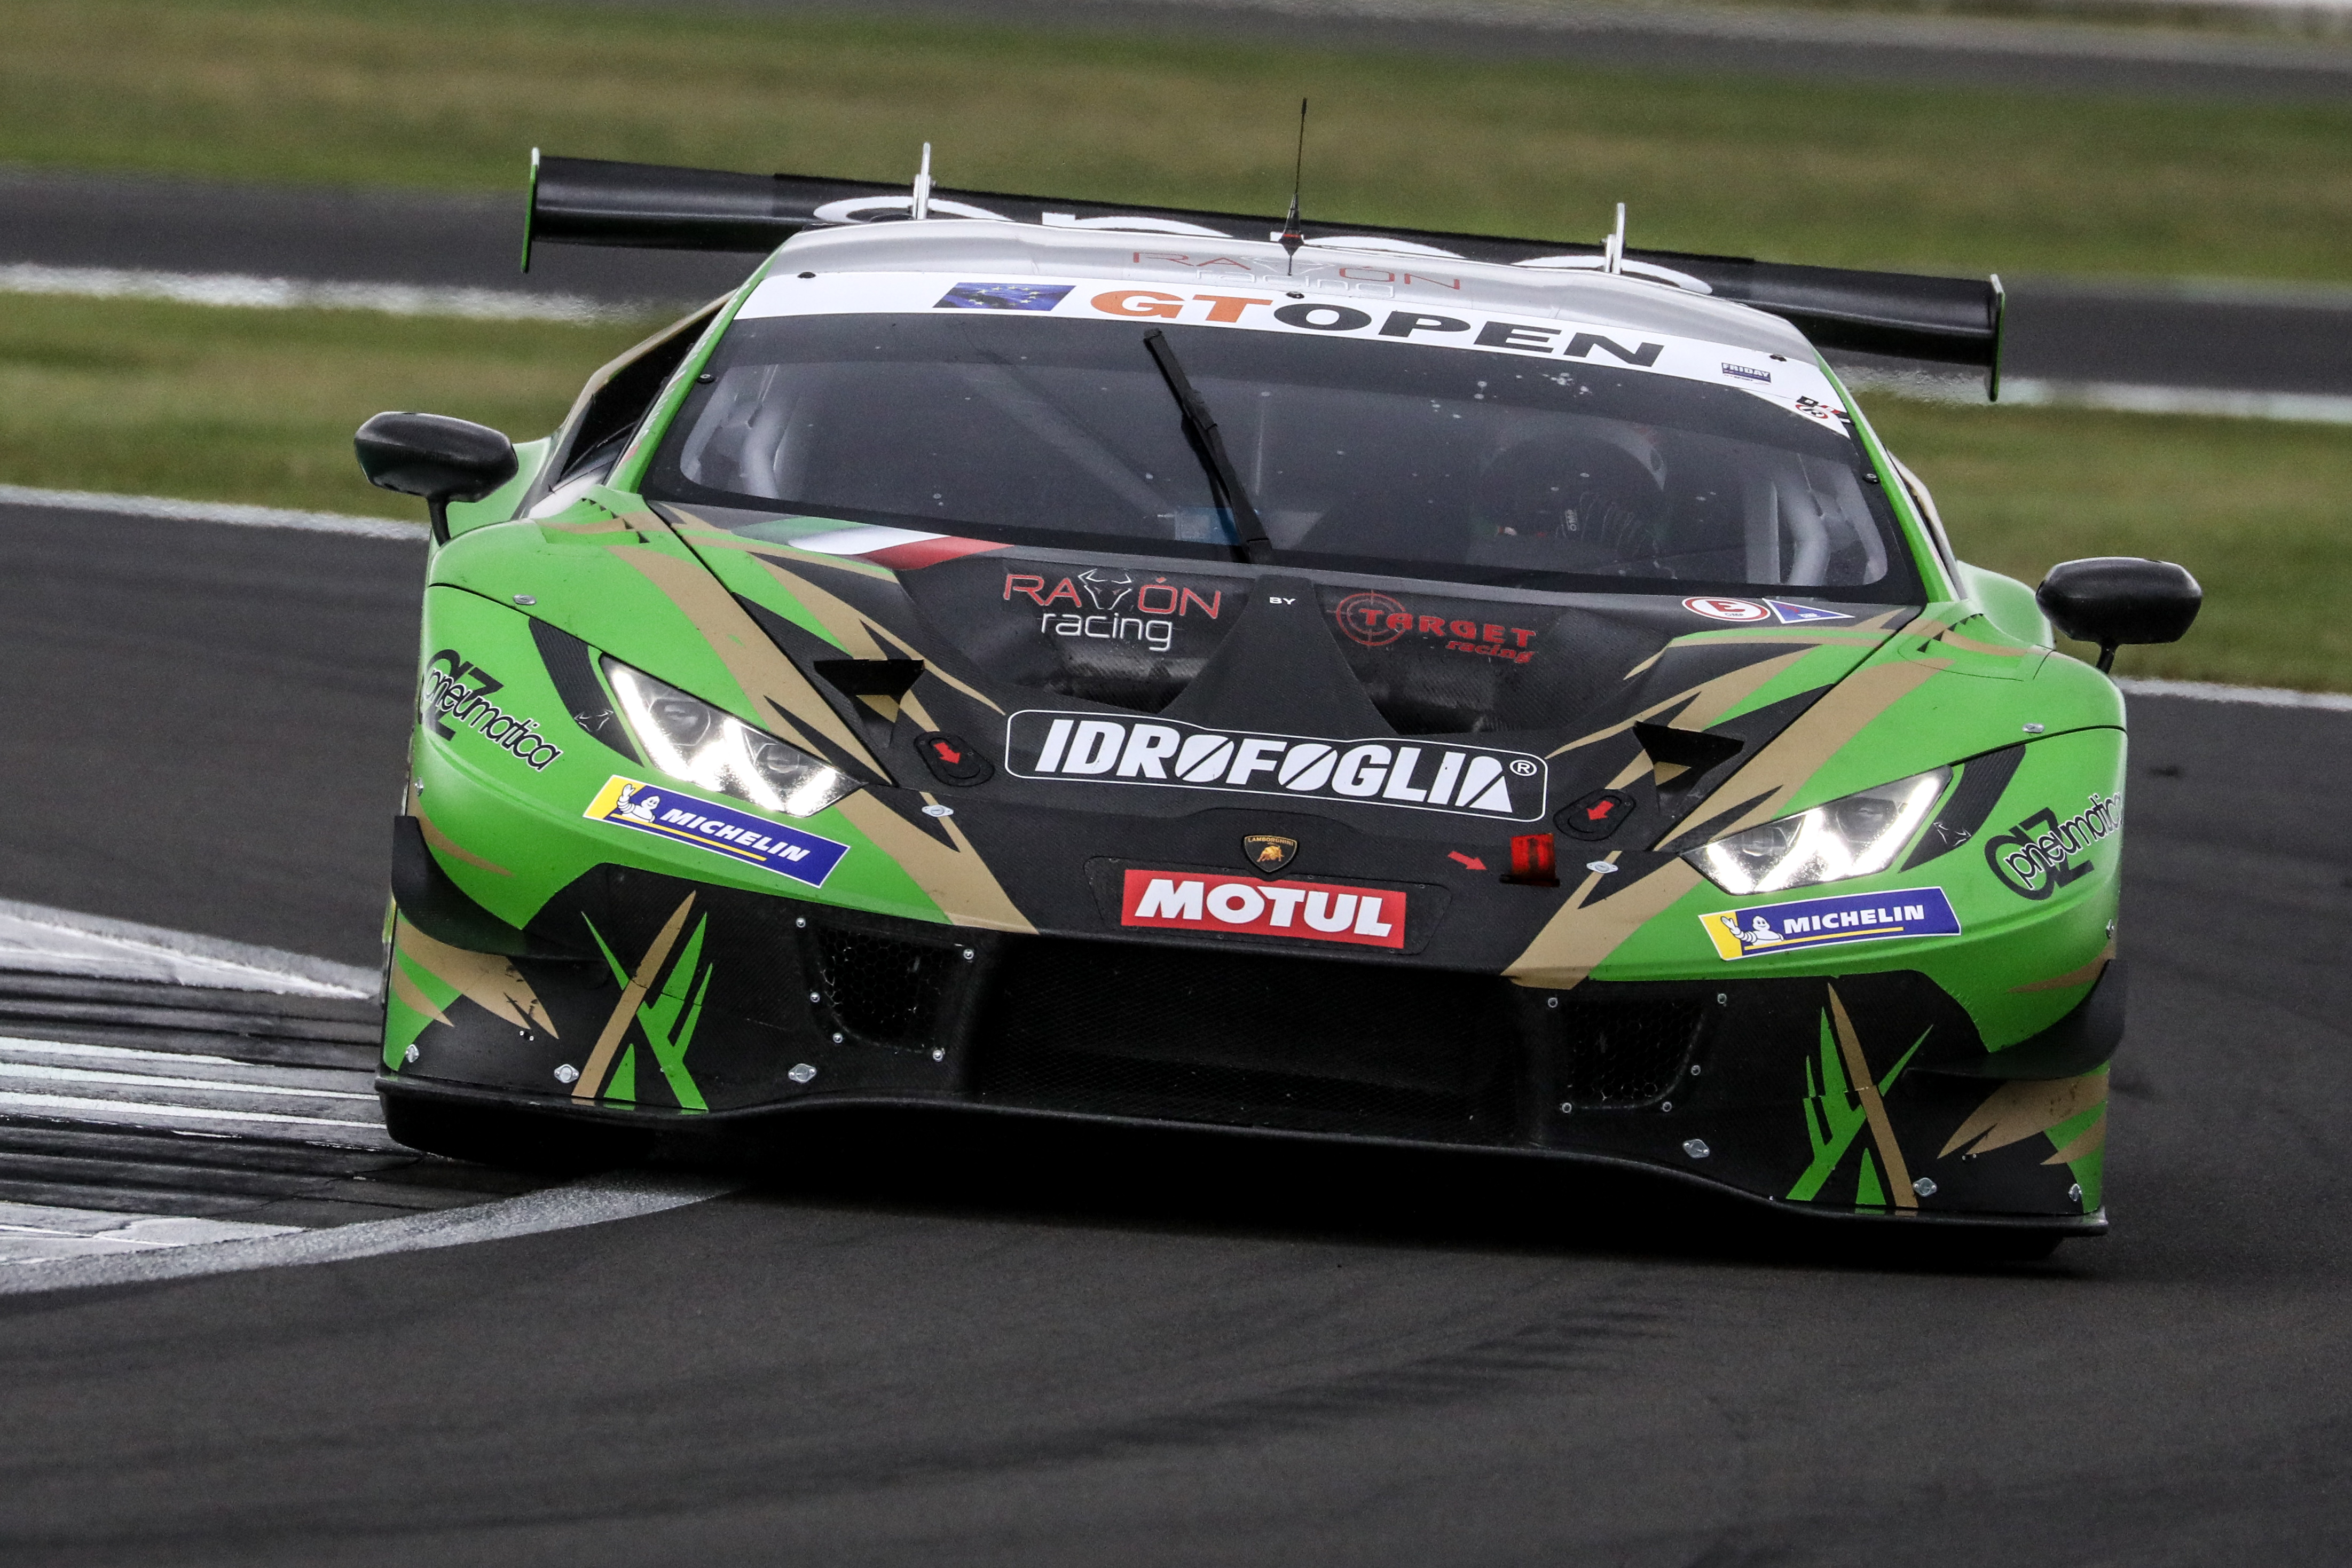 Raton by Target to field a car for Jiatong-Giammaria at Silverstone for GT Open